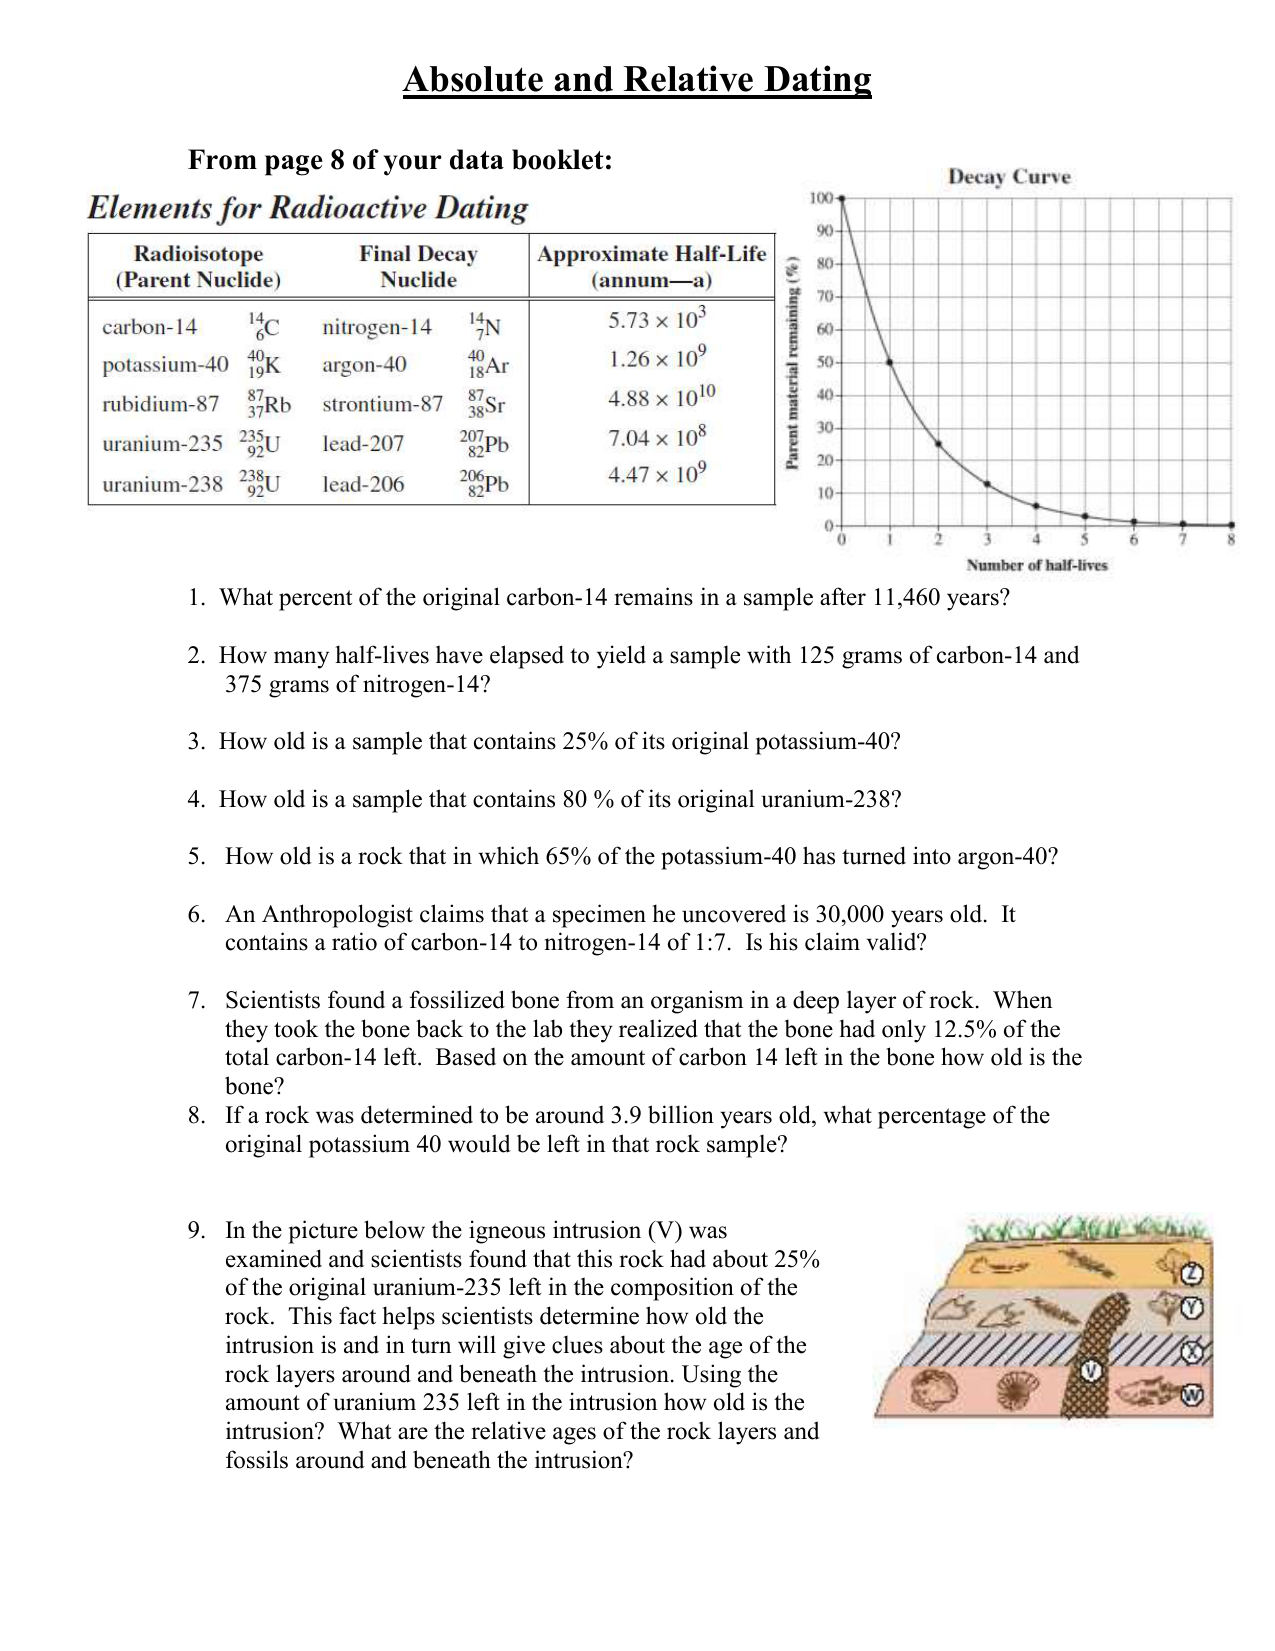 Dating fossils relative worksheet of Fossils And